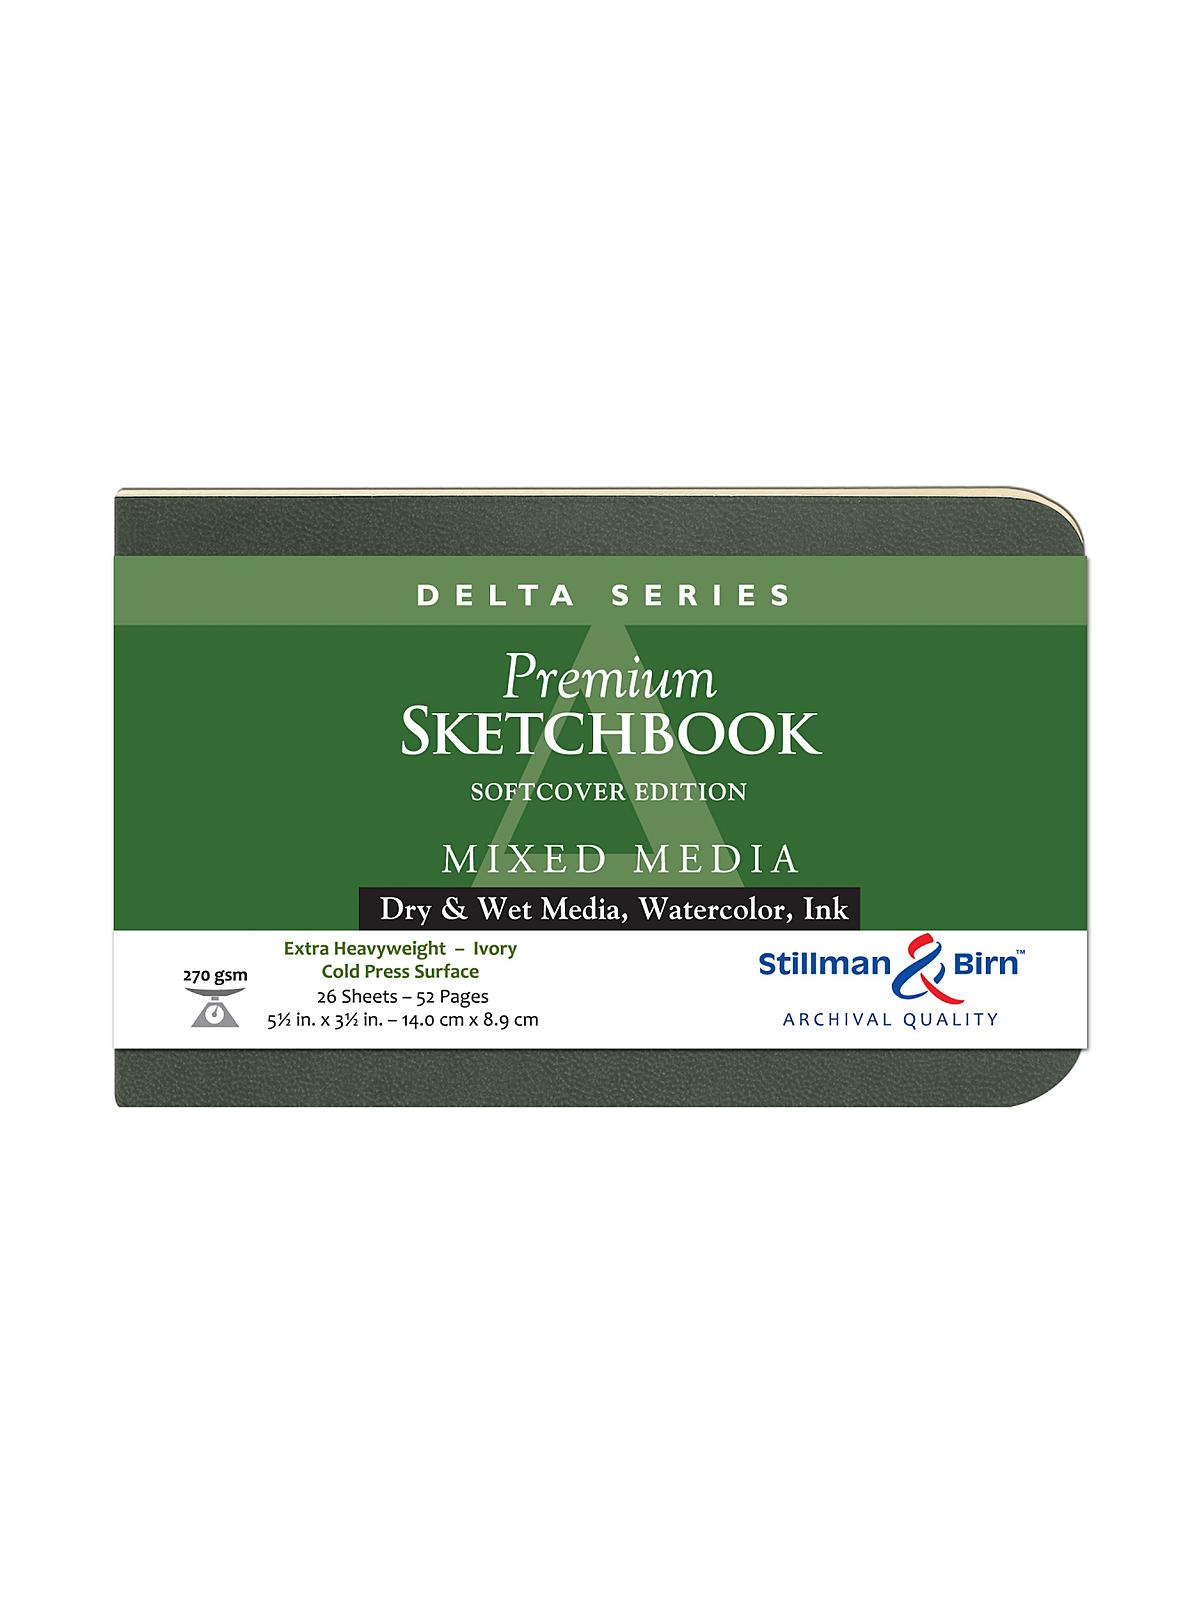 Delta Series Softcover Sketchbooks 5.5 In. X 3.5 In. Landscape 56 Pages